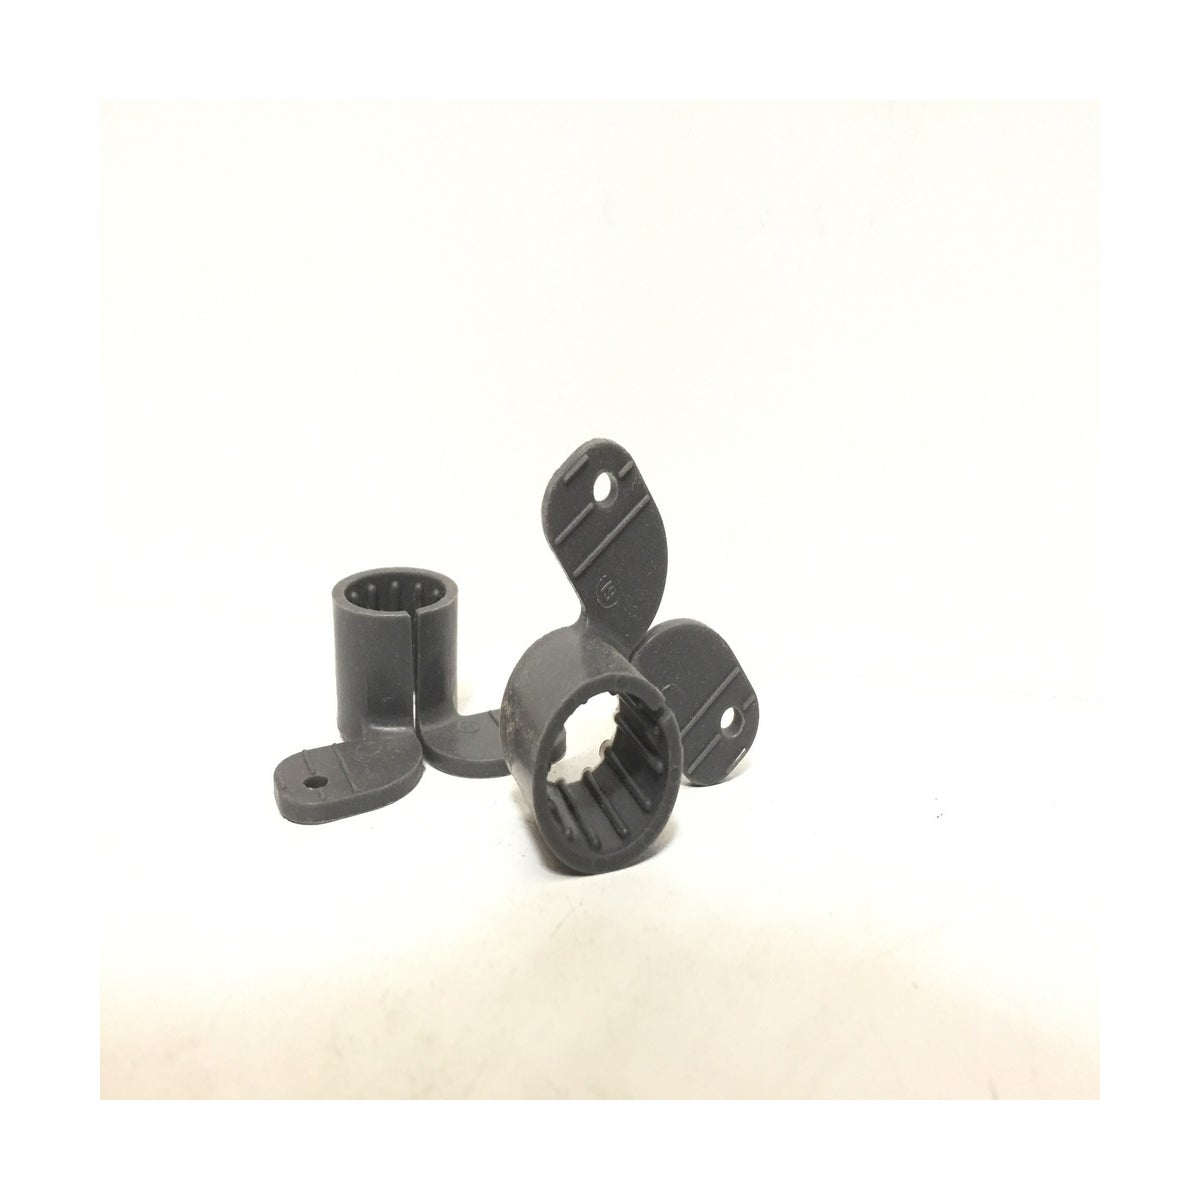 1/2" POLY SUSPENSION PIPE CLAMP